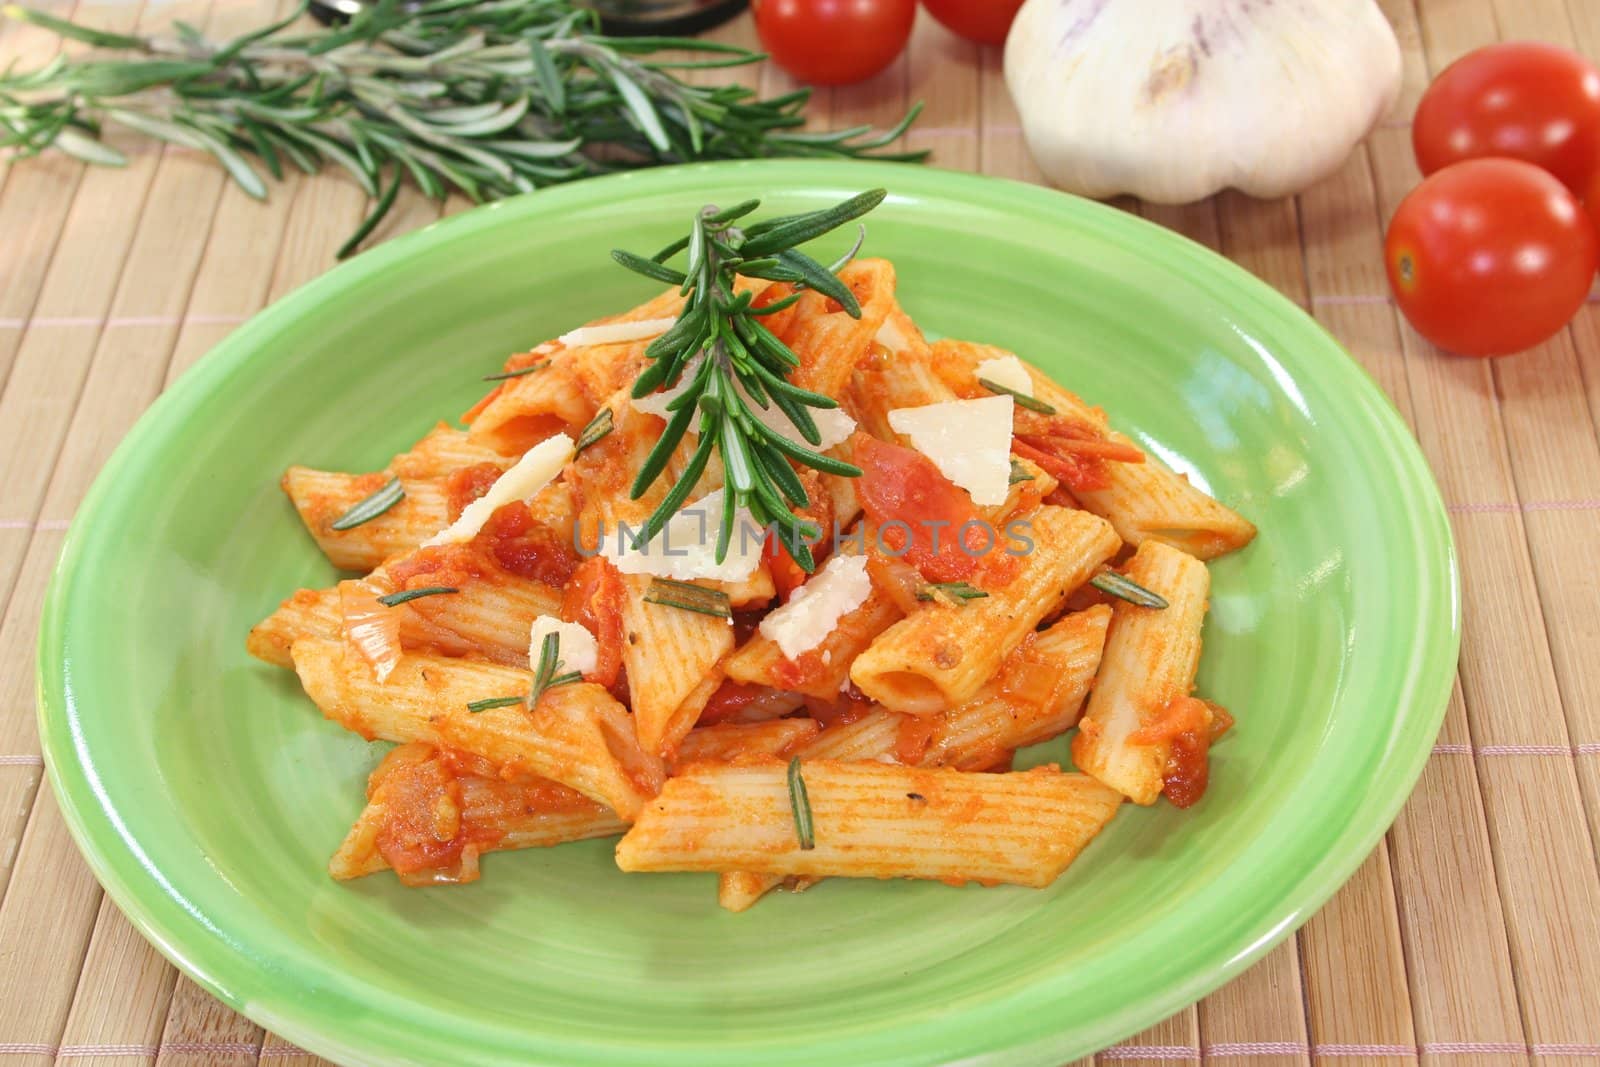 Penne with tomato sauce, Parmesan and rosemary